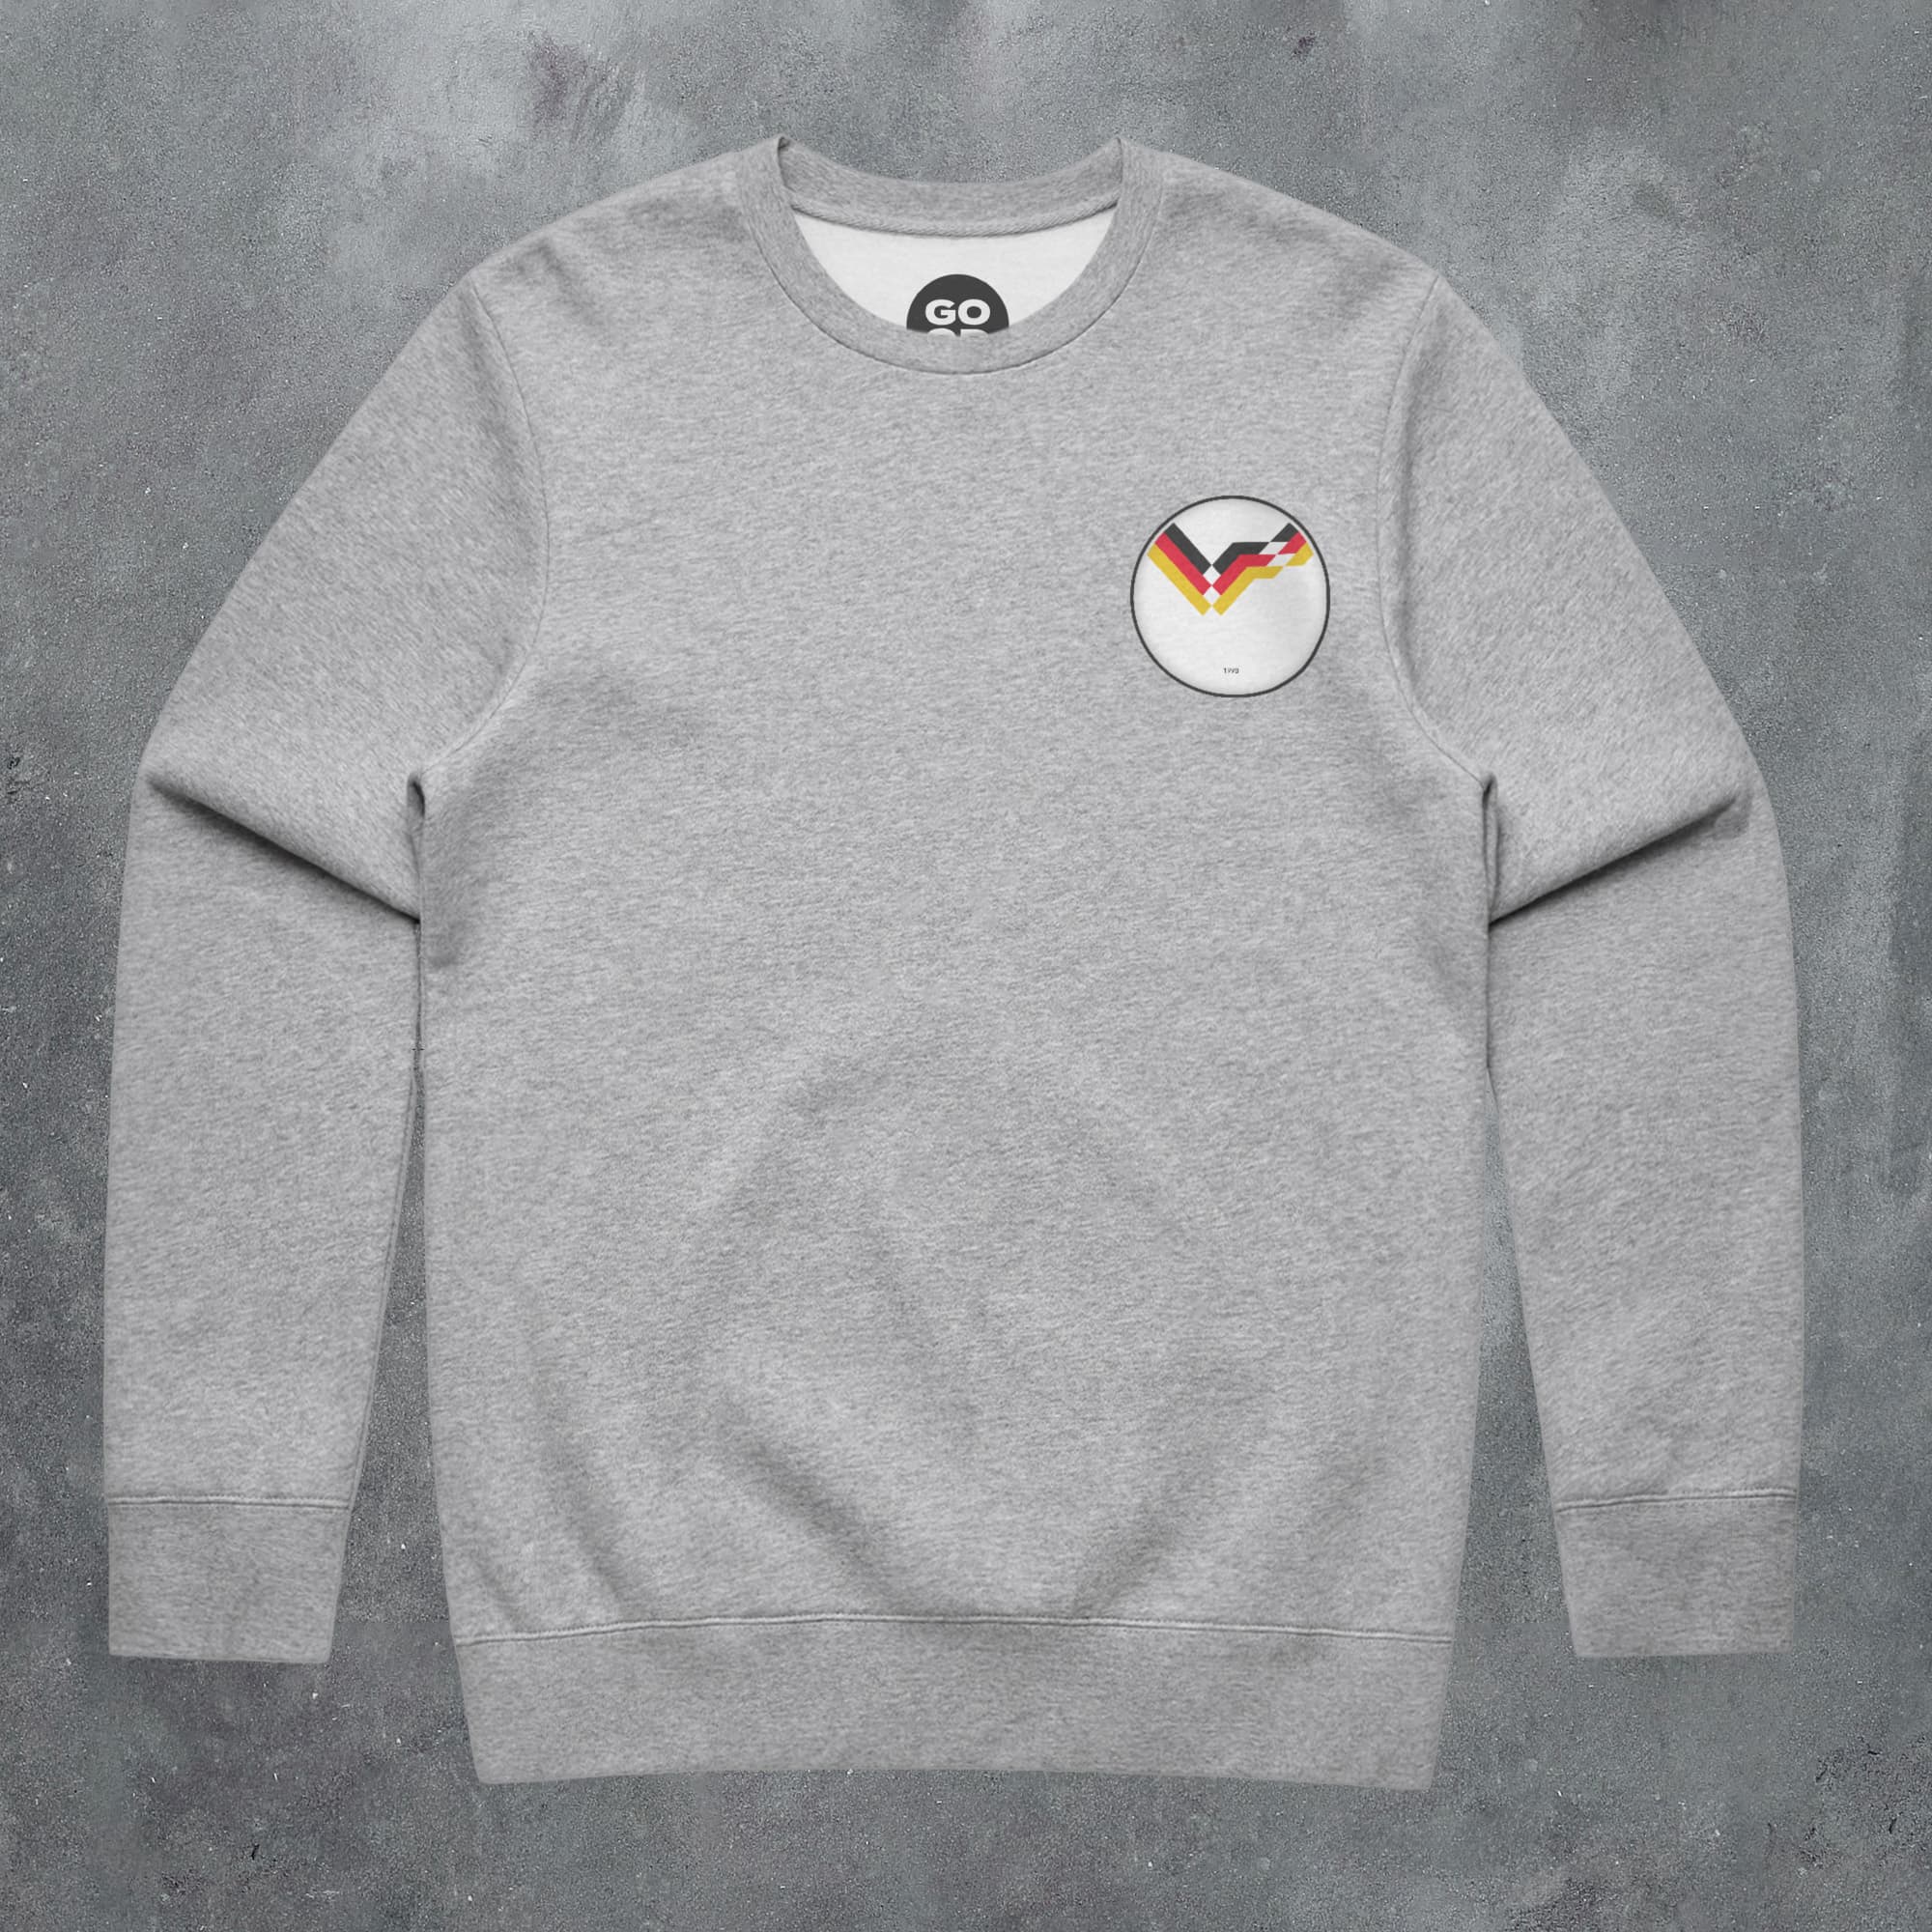 a grey sweatshirt with a rainbow patch on the chest